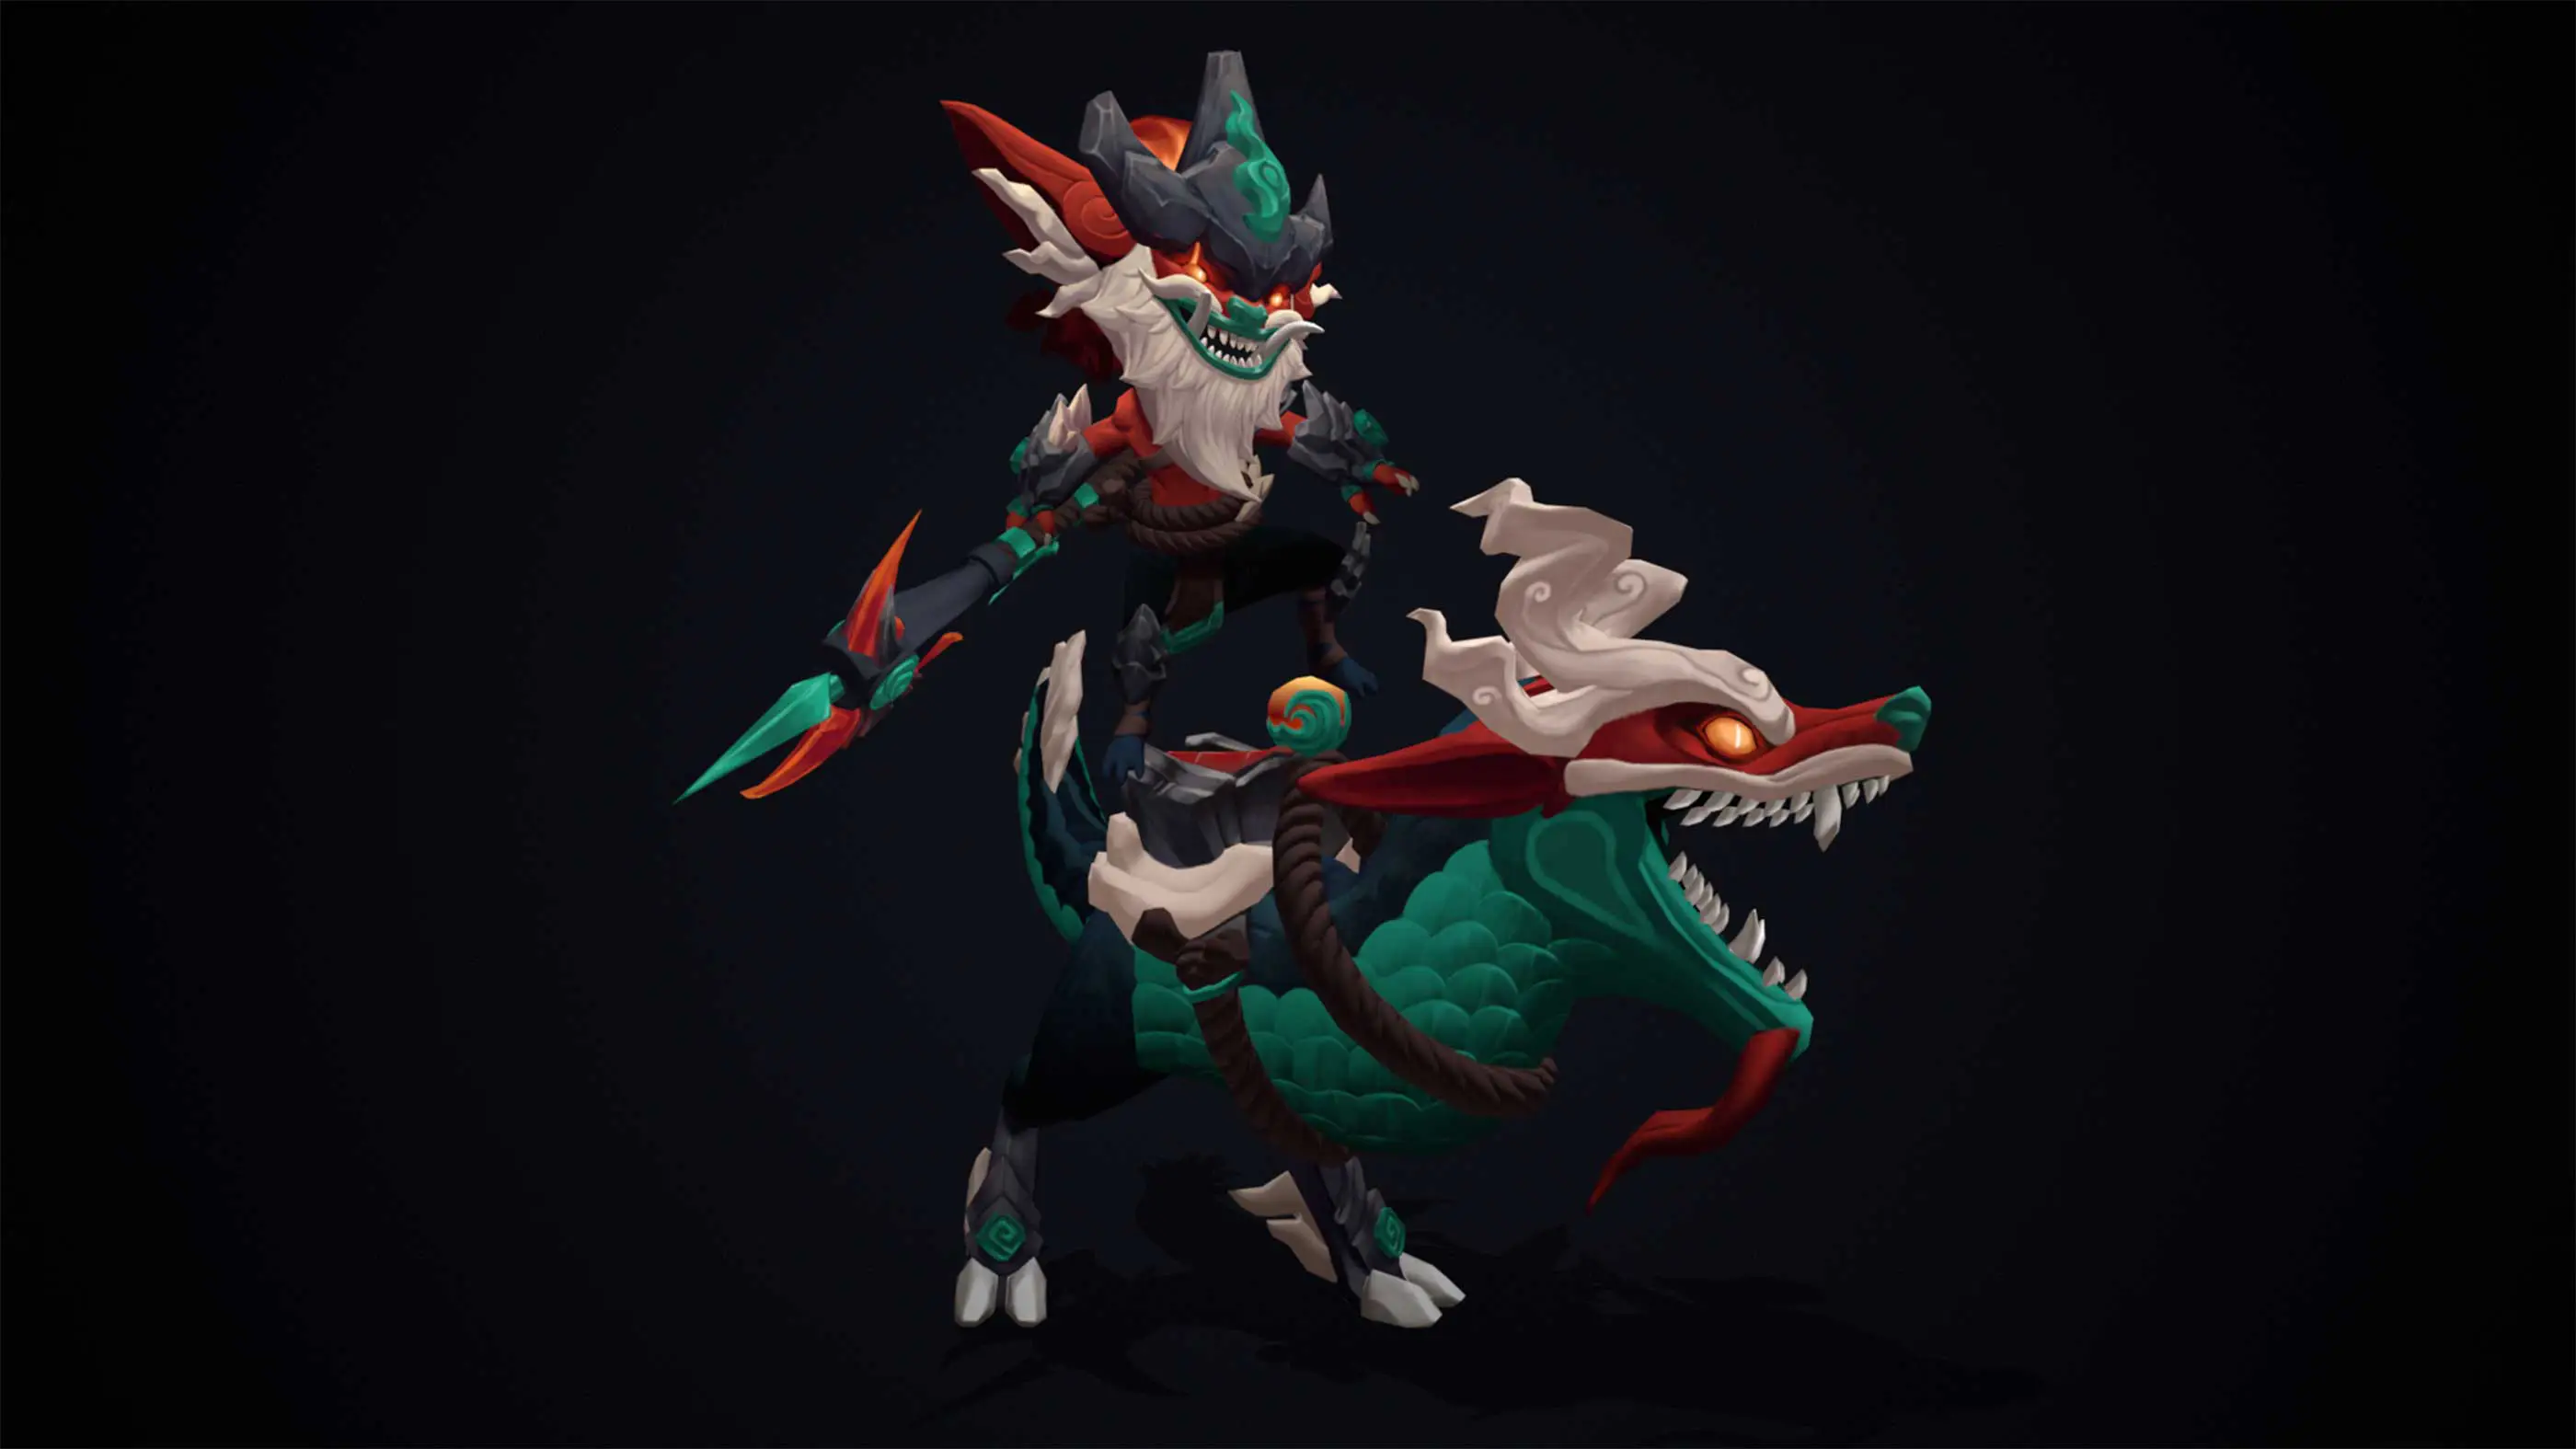 A 3D render of a person in a mask riding a very short dragon.